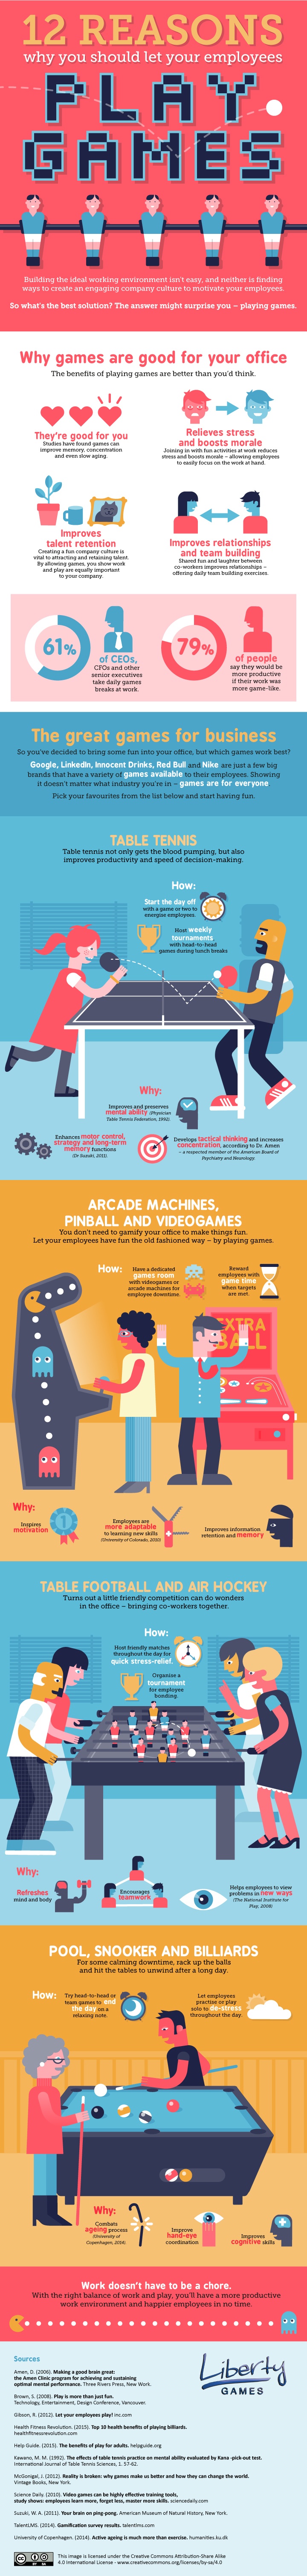 Why You Should Let Your Employees Play Games Infographic